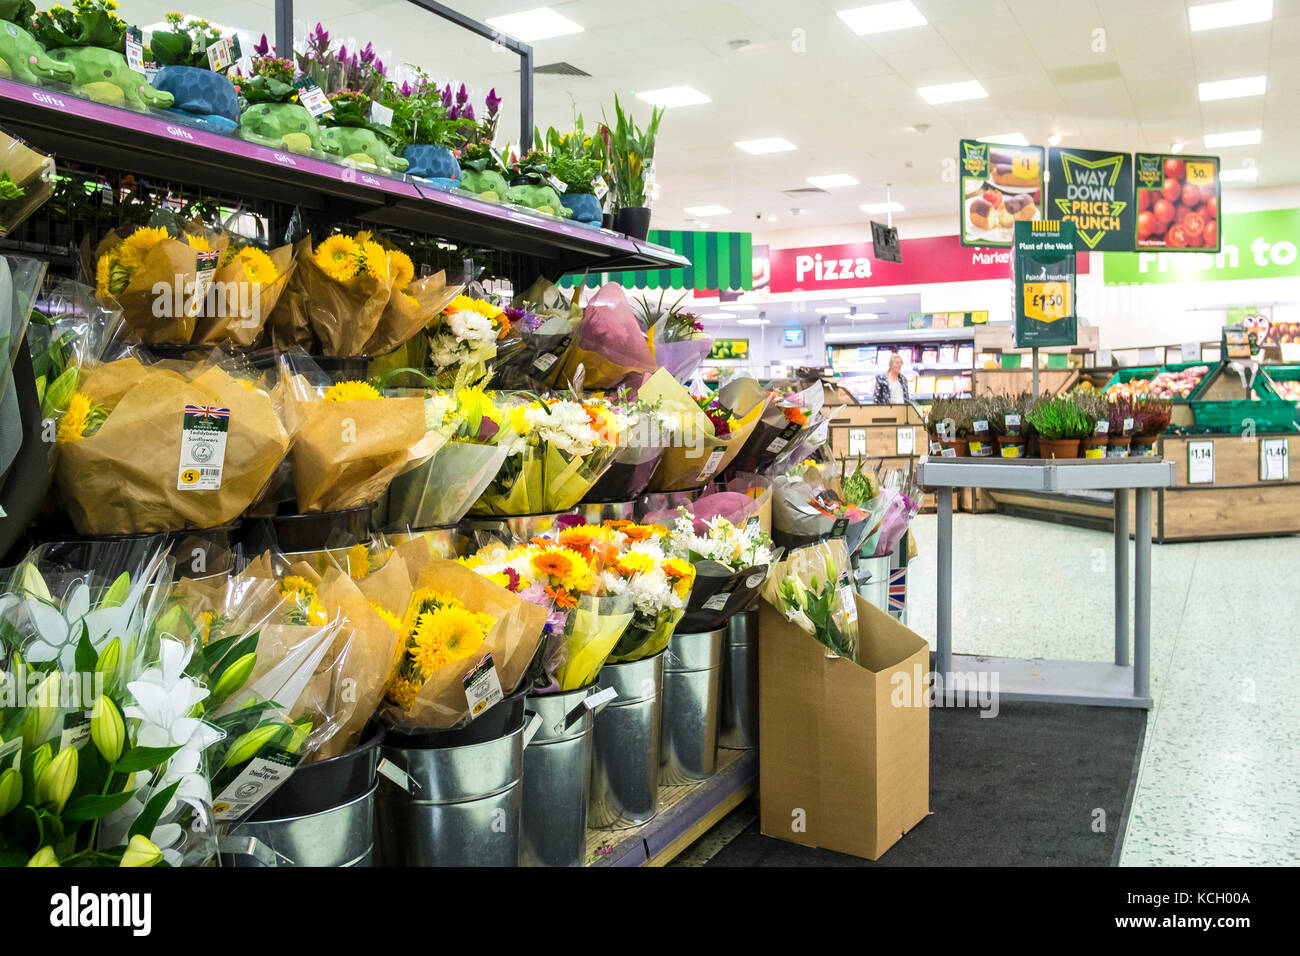 Shopping In A Supermarket Bouquets Of Flowers On Display And For Sale In A Morrisons Supermarket Stock Photo Alamy